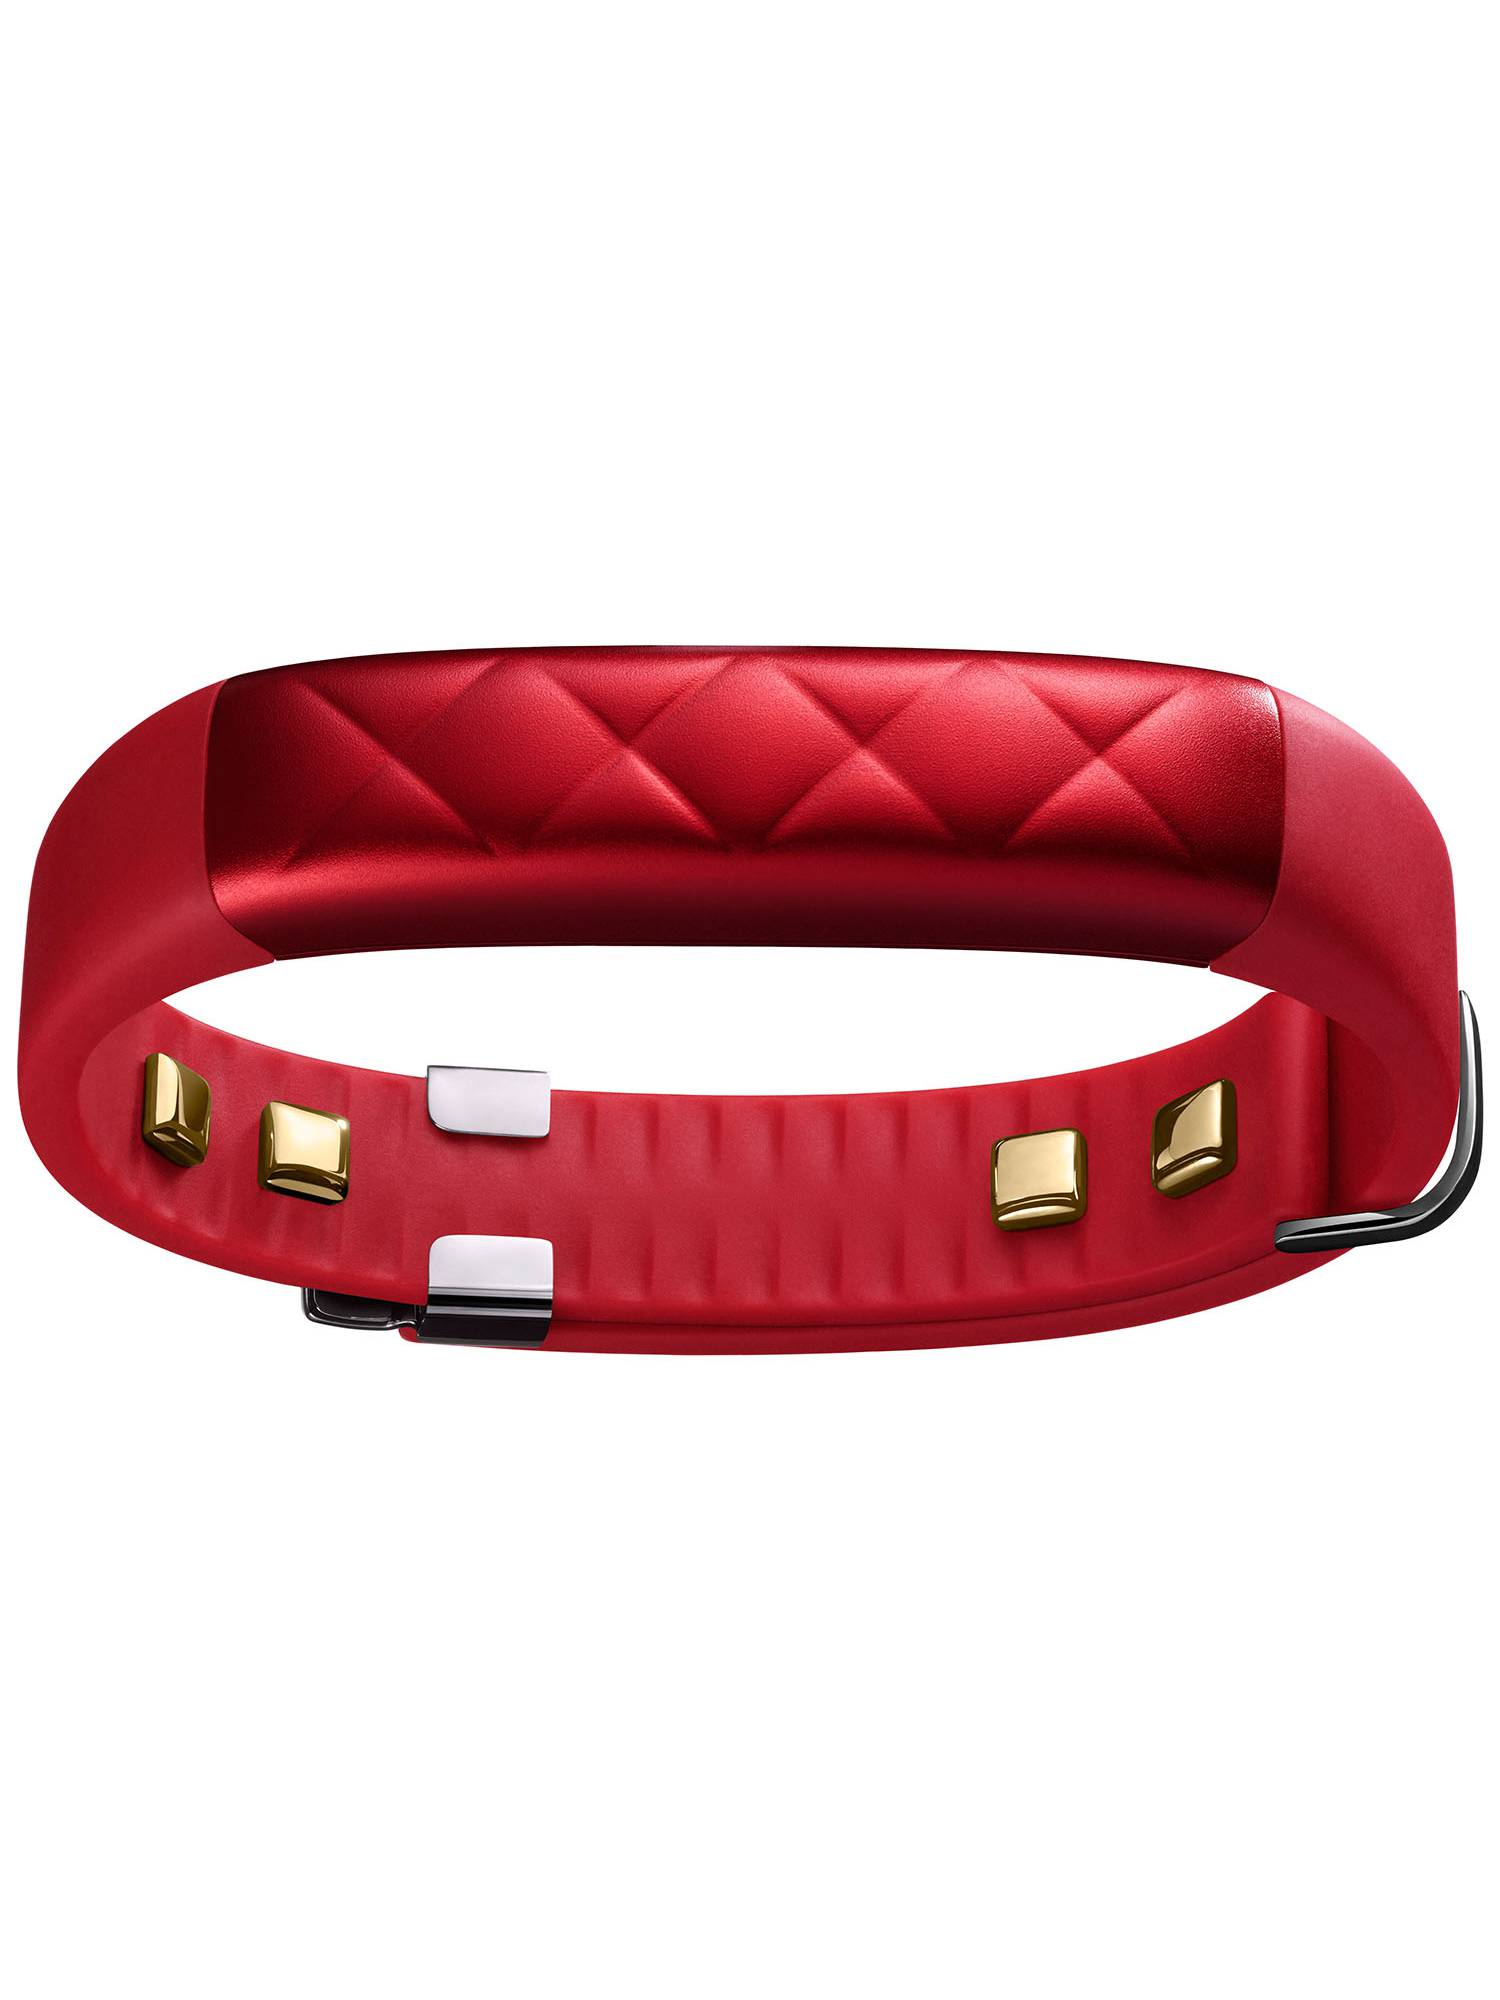 Jawbone UP3 Bluetooth Wireless Heart Rate Monitor, Sleep and Fitness Tracker - image 1 of 2